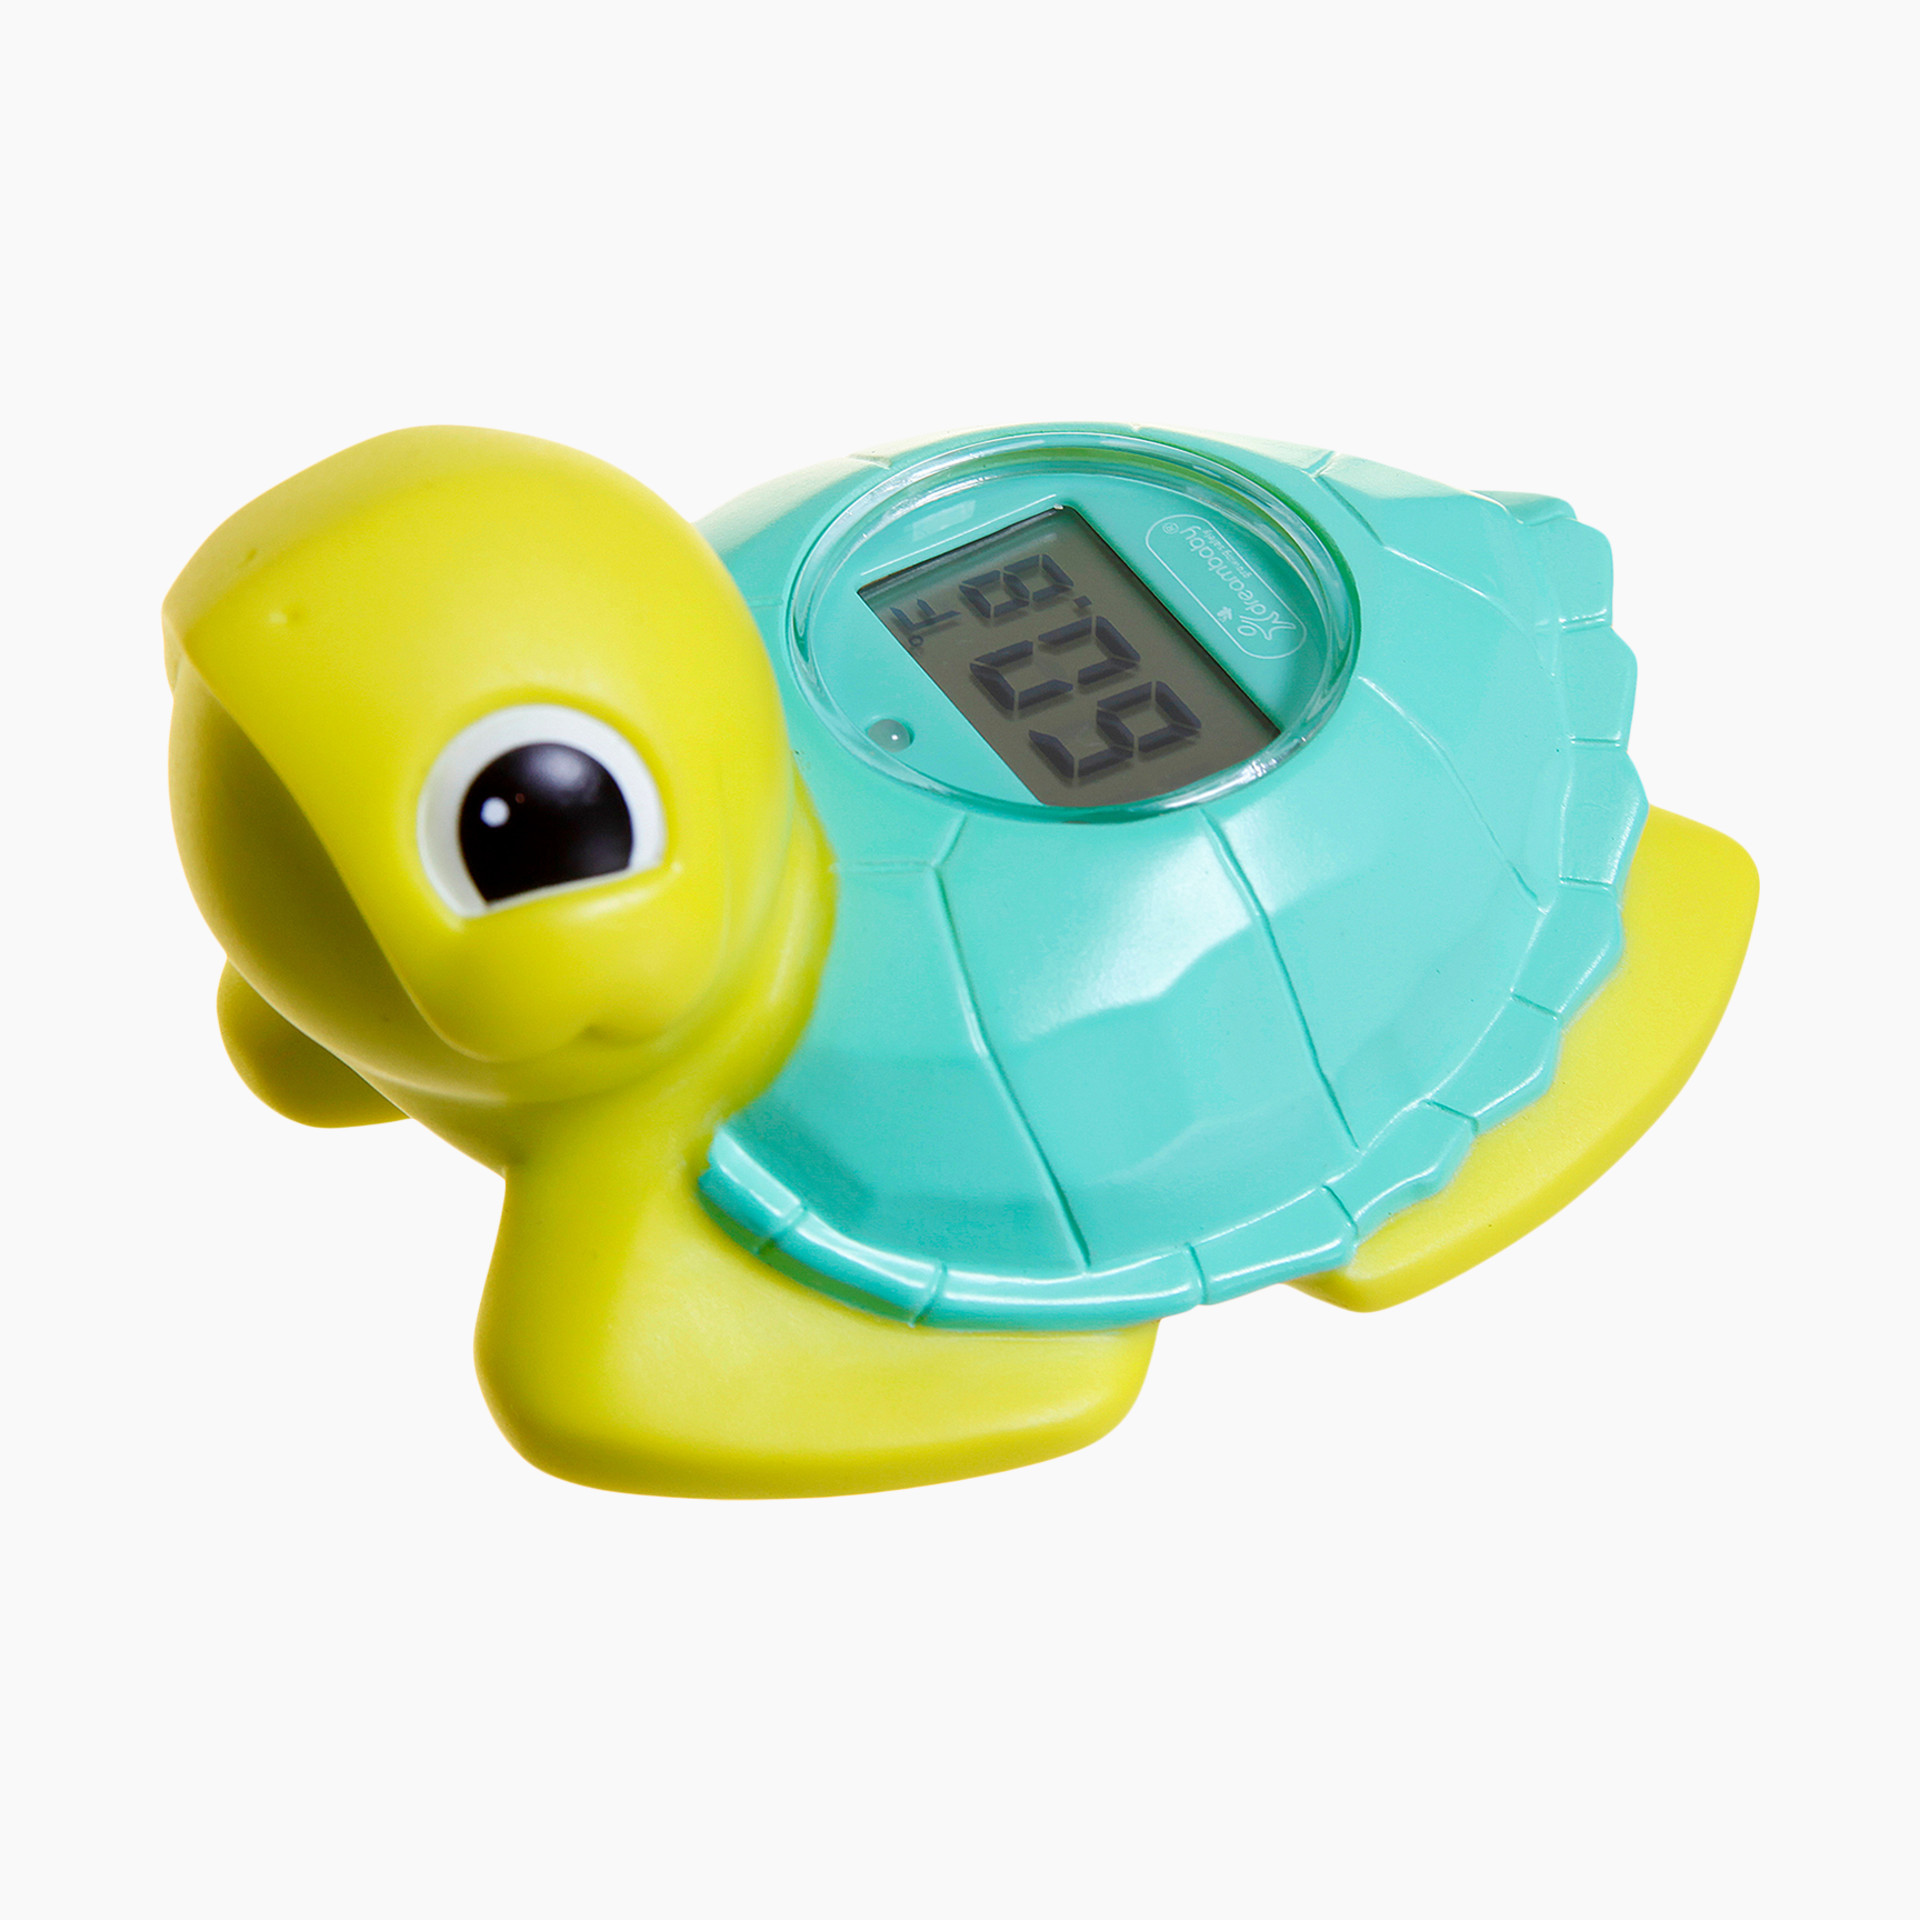 1 Pc Rubber Ducky Baby Room Thermometer Bath Tub Nursery